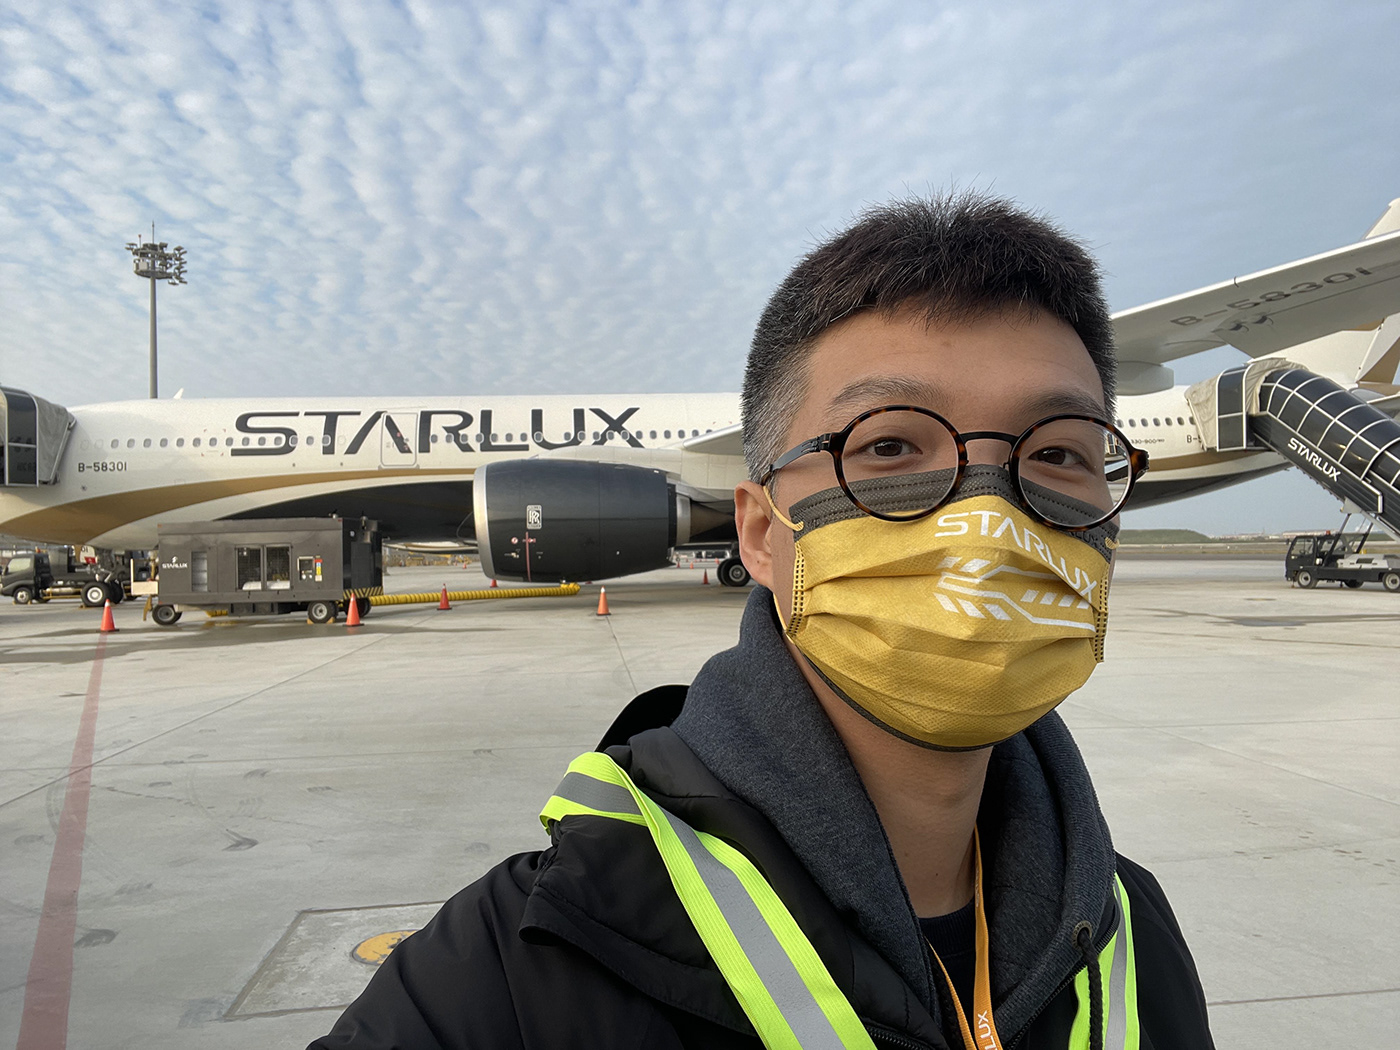 A330Neo Airbus Aircraft airline airplane airport airway aviation STARLUX STARLUX Airlines